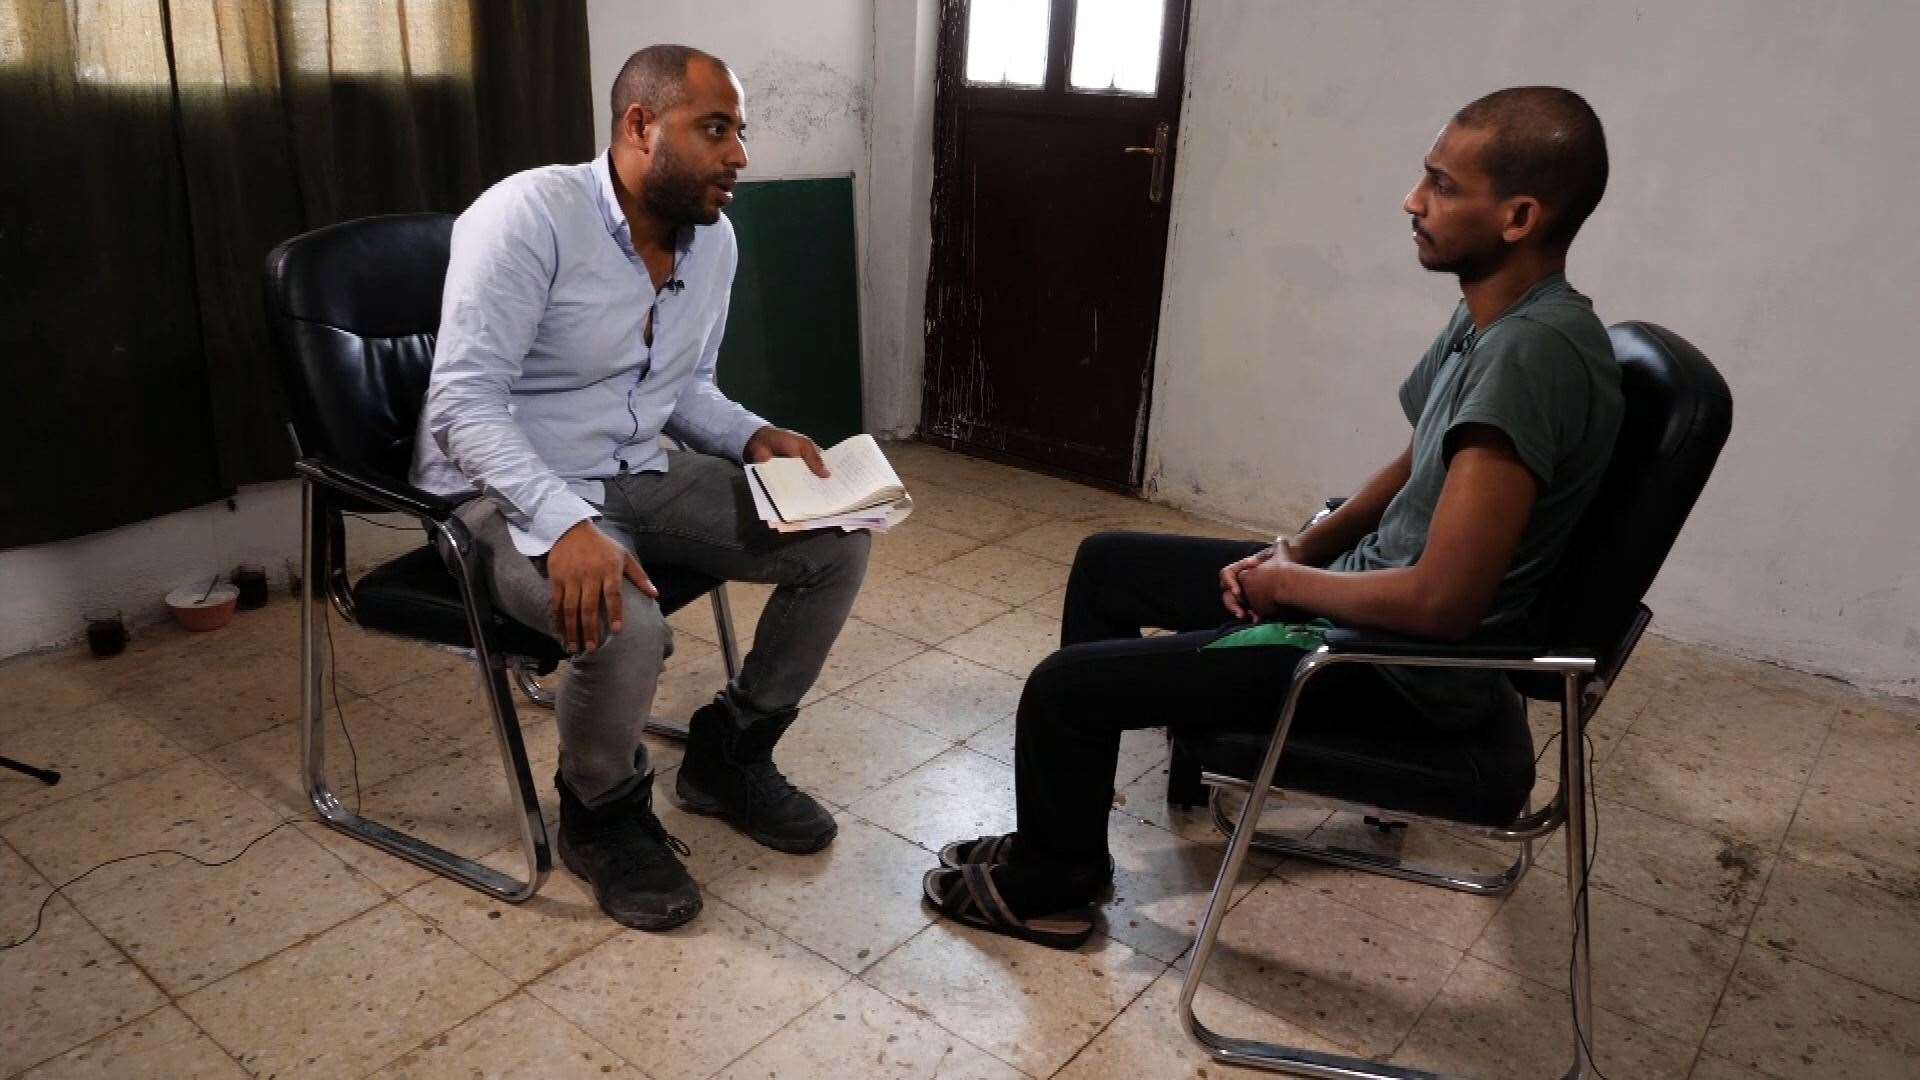 El Shafee Elsheikh (right) talking to ITV’s security editor Rohit Kachroo (ITV News/PA)